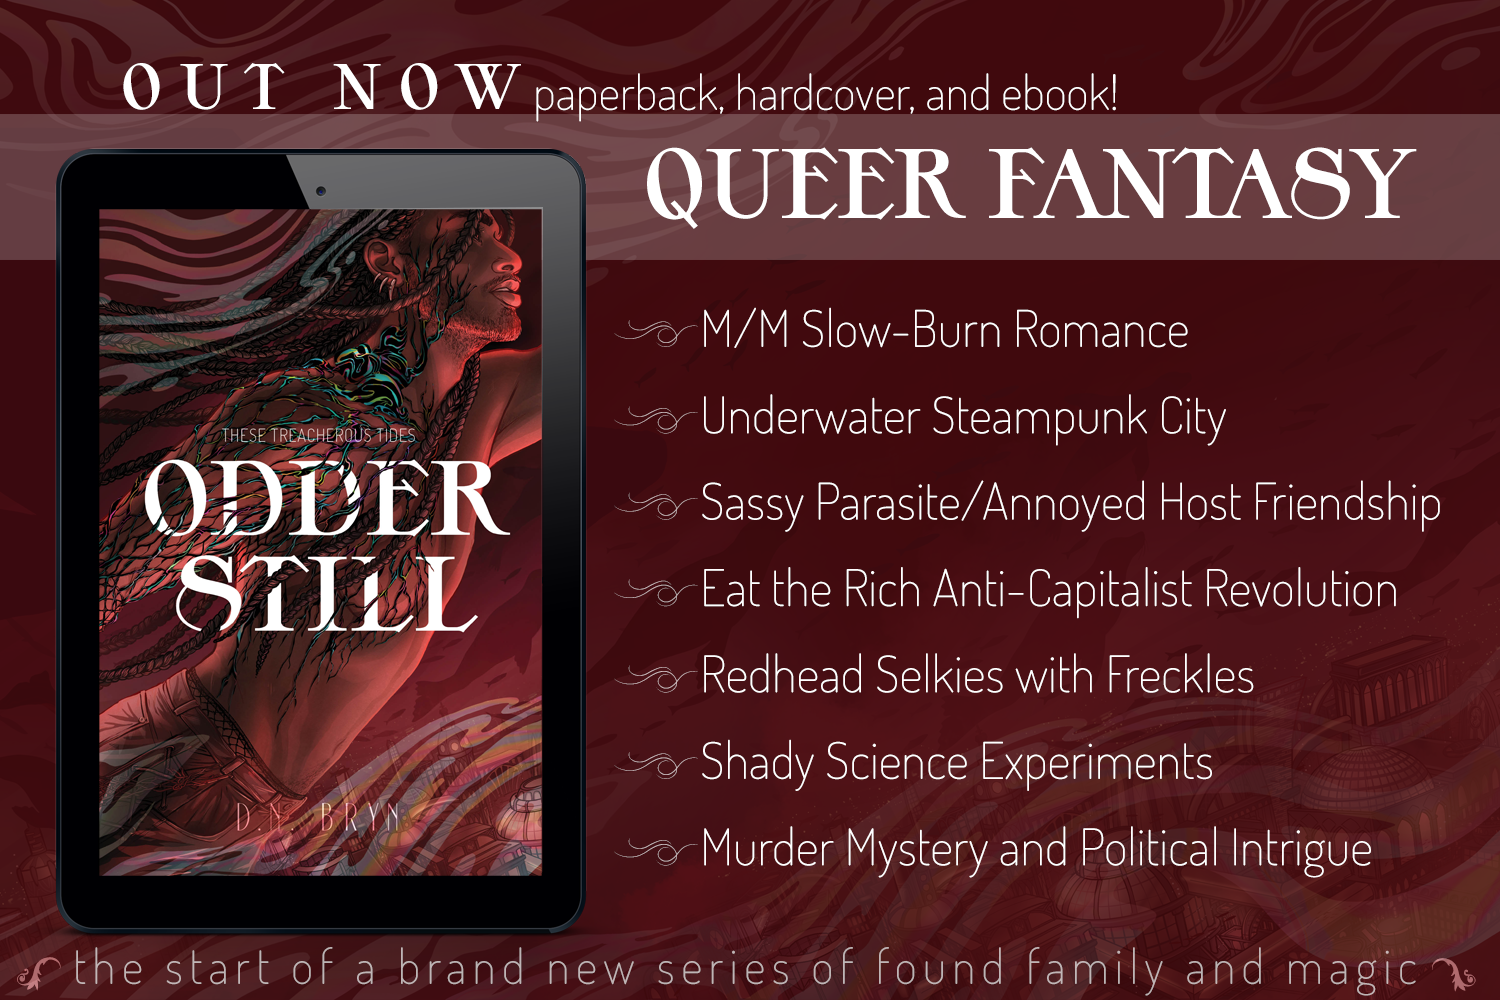 Odder Still is out now!